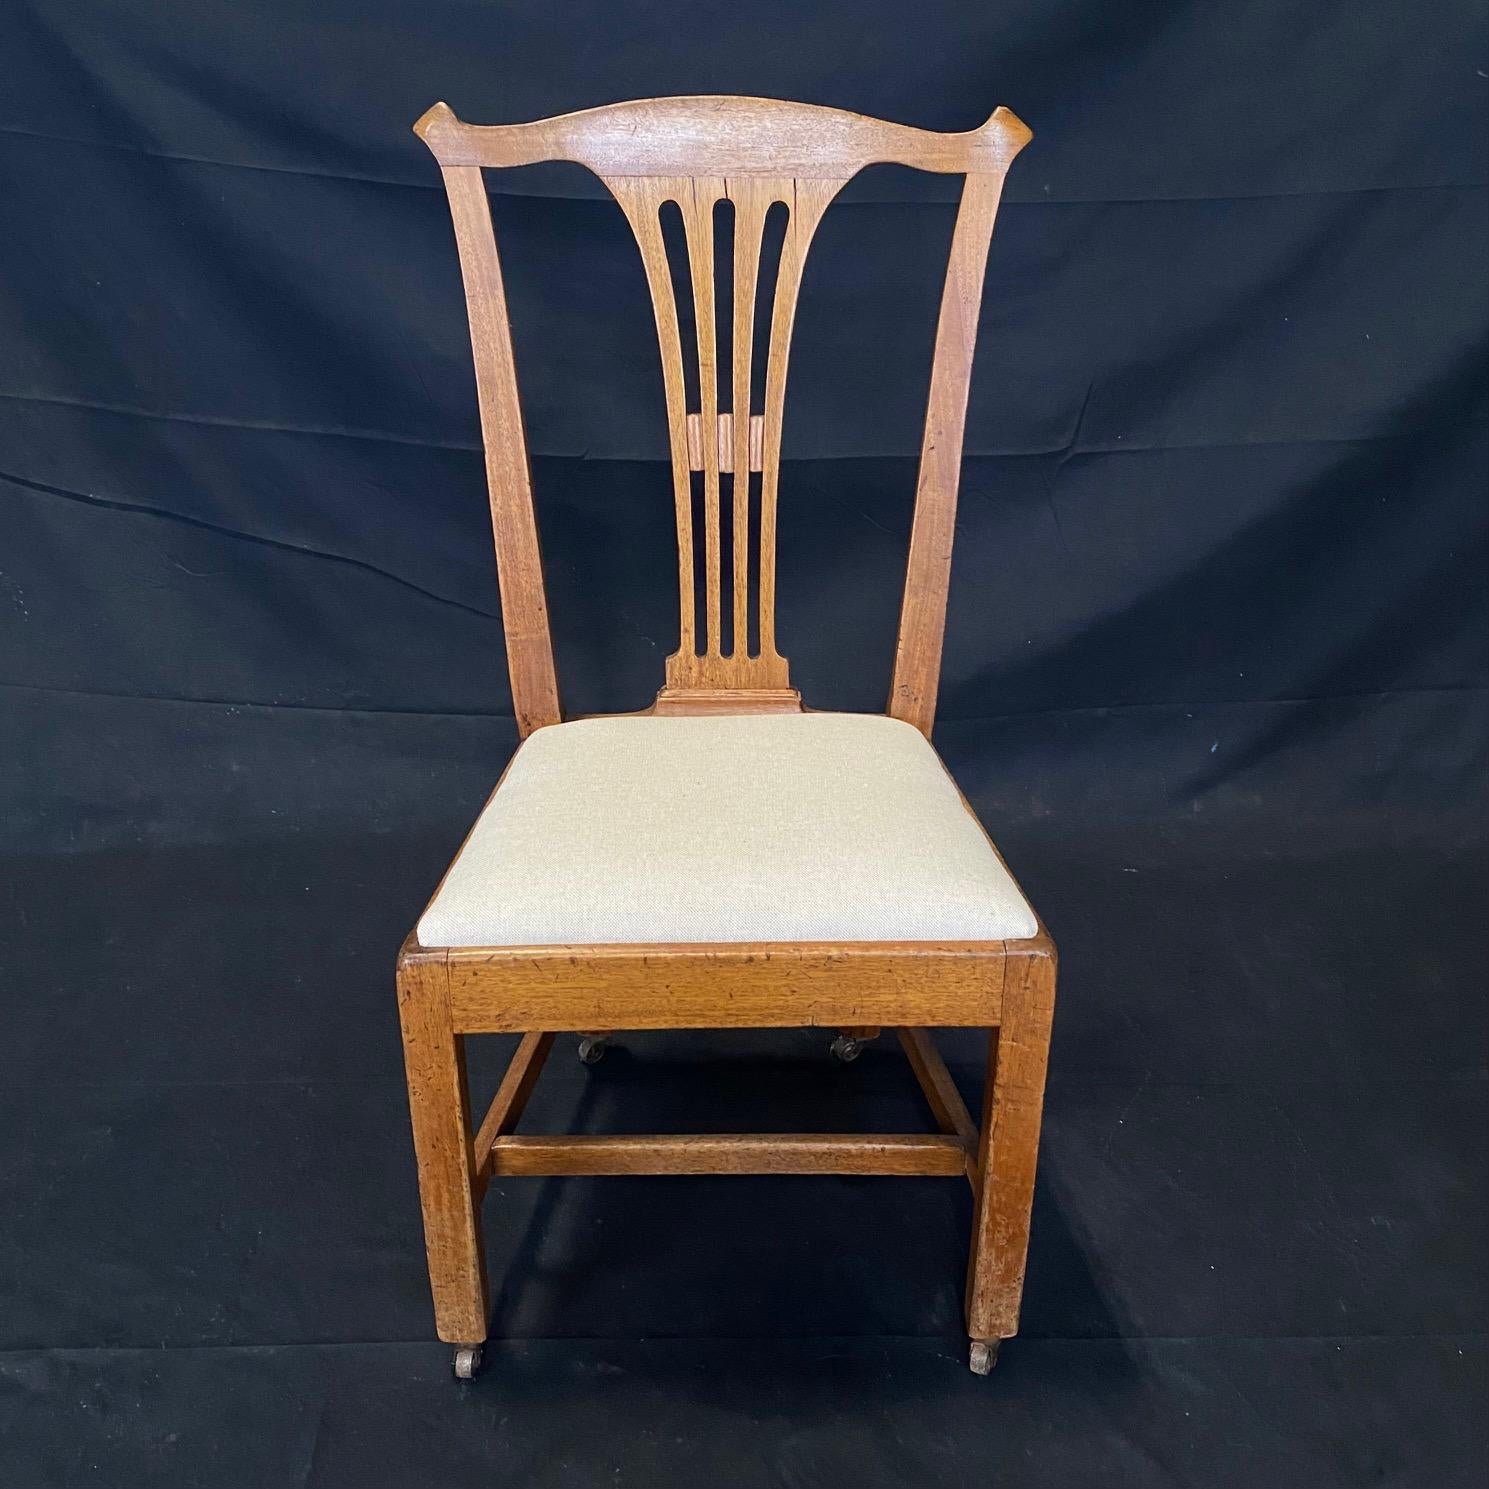 A pair of Classic George III style side chairs made in solid ash having hand carved spandrels with a beautiful warm and rich well developed color frame. The chairs are solid without weakness, repairs, replacements or loose joints and are newly